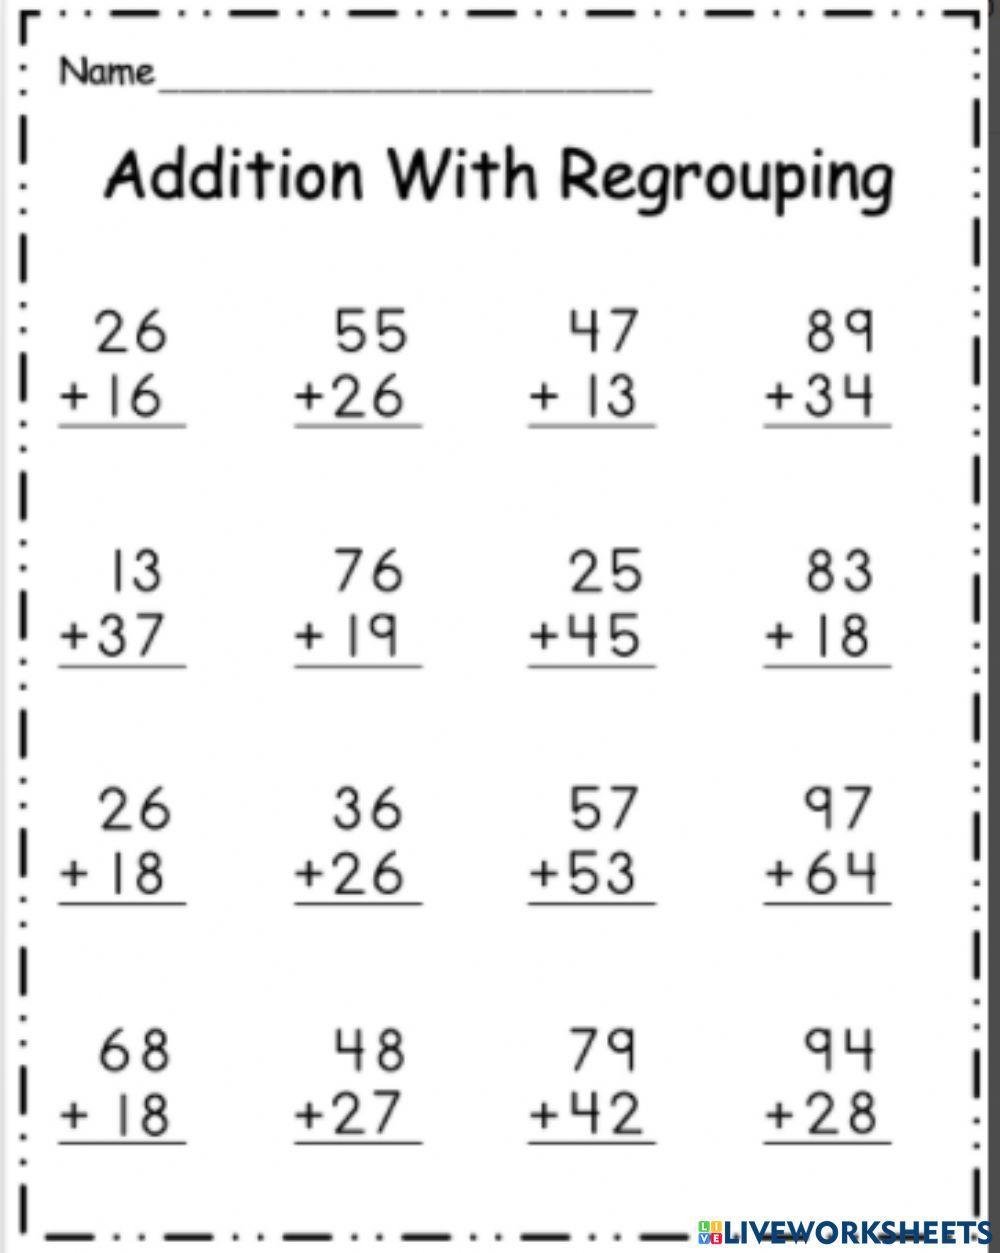 Add with Regrouping